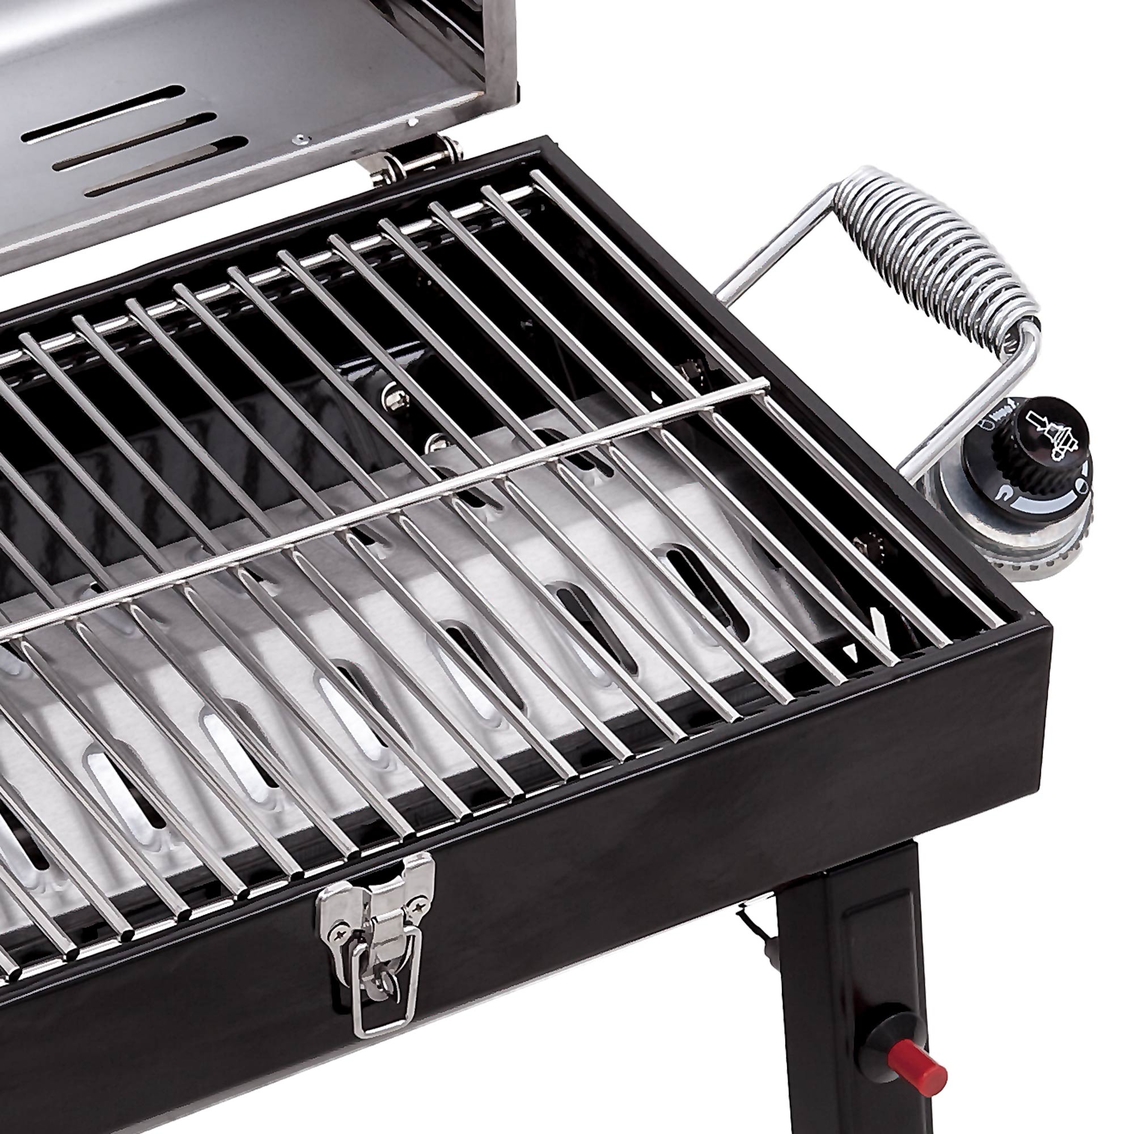 Char-Broil LP Gas Grill 200 - Image 4 of 5